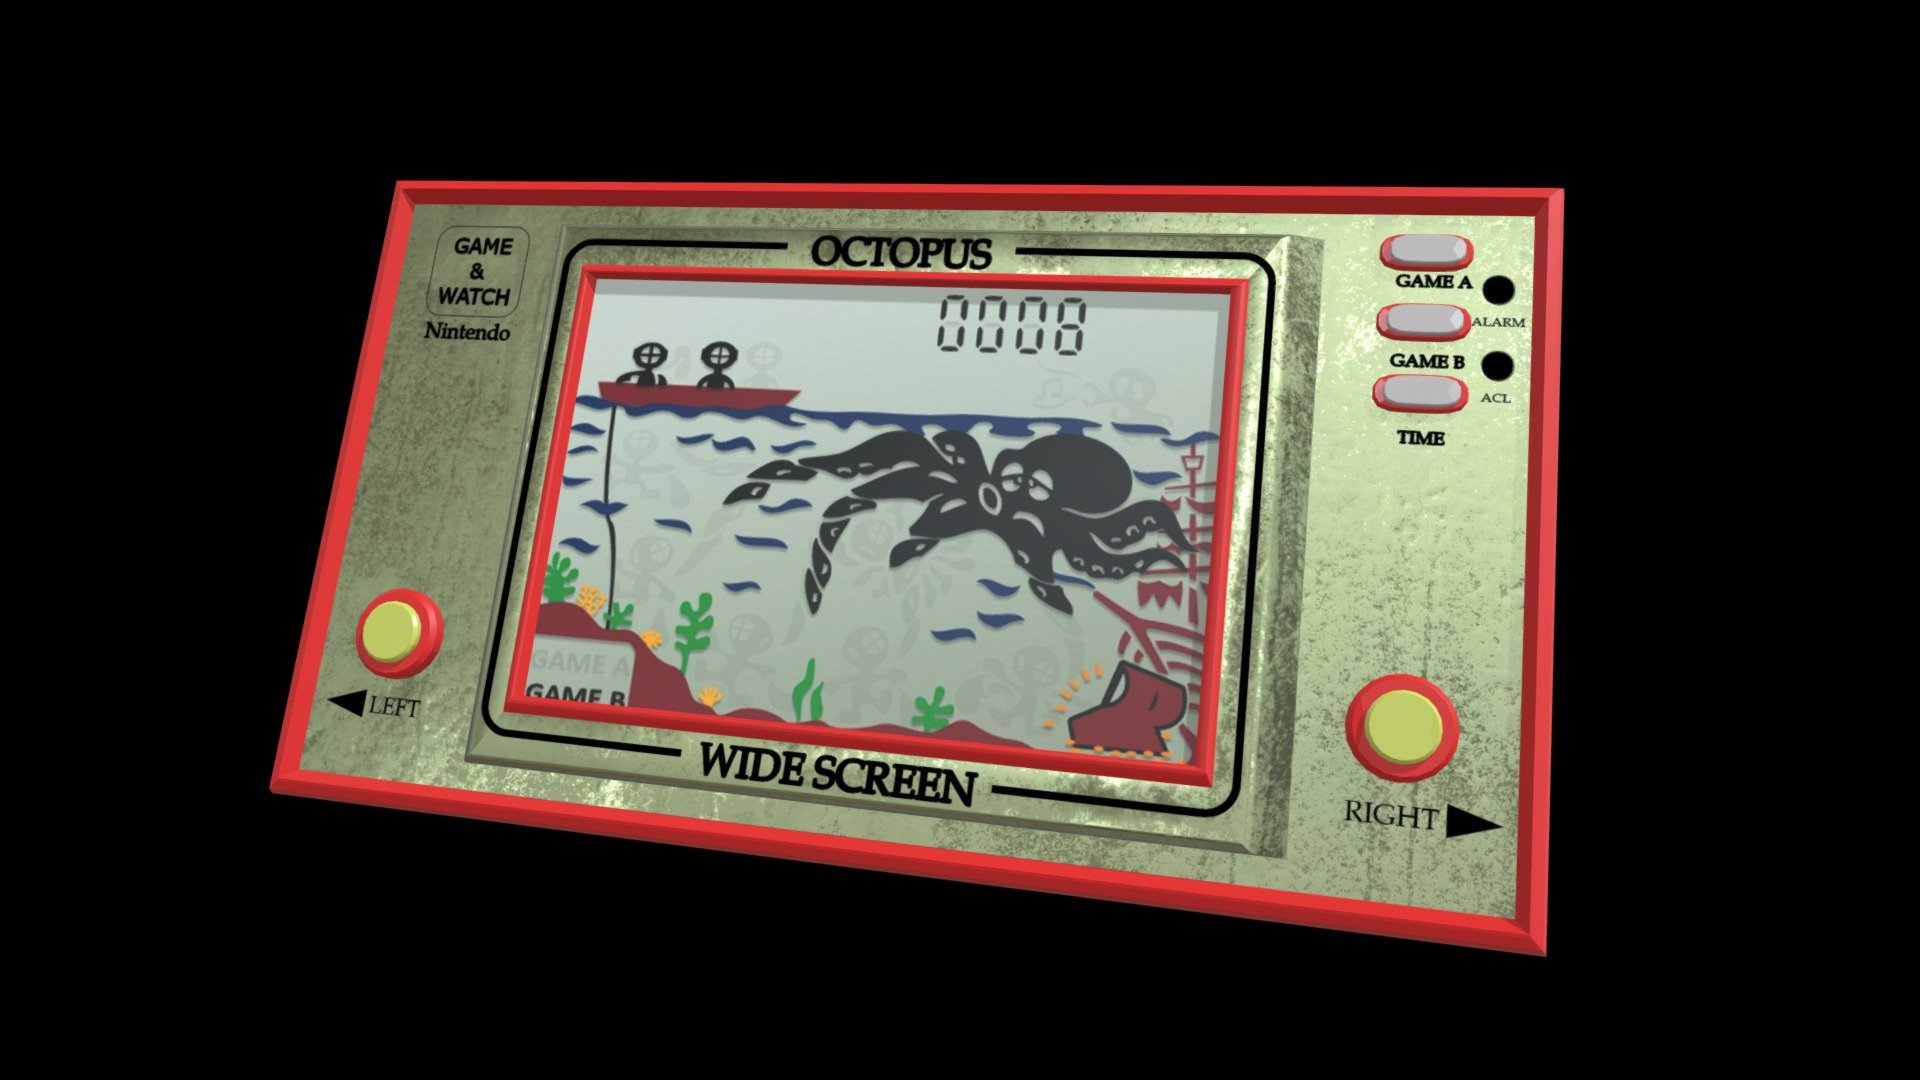 Hello everybody!
This is Nintendo Game &amp; Watch Octopus Oc-22.
I modeled this game for challenge: #RetroElectronicsChallenge.
Welcome to my https://www.artstation.com/natali_voitova - Nintendo Game & Watch Octopus Oc-22 - Download Free 3D model by Natali_Voitova 3d model